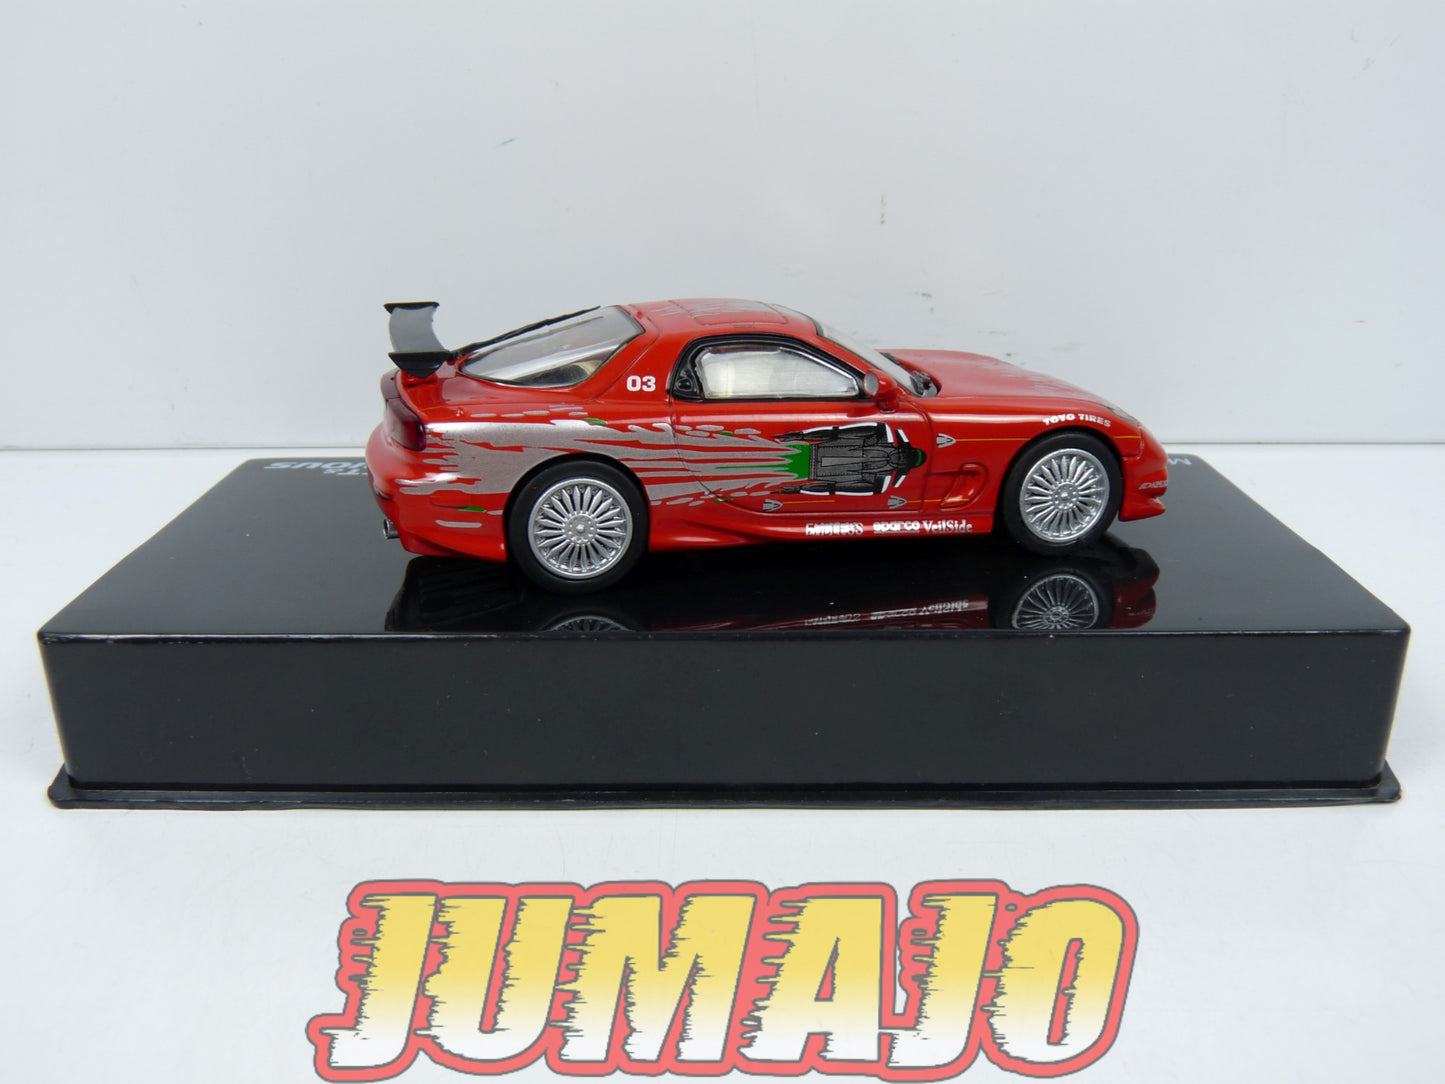 FF14 Voiture 1/43 IXO altaya Fast and Furious : Mazda RX-7 FD